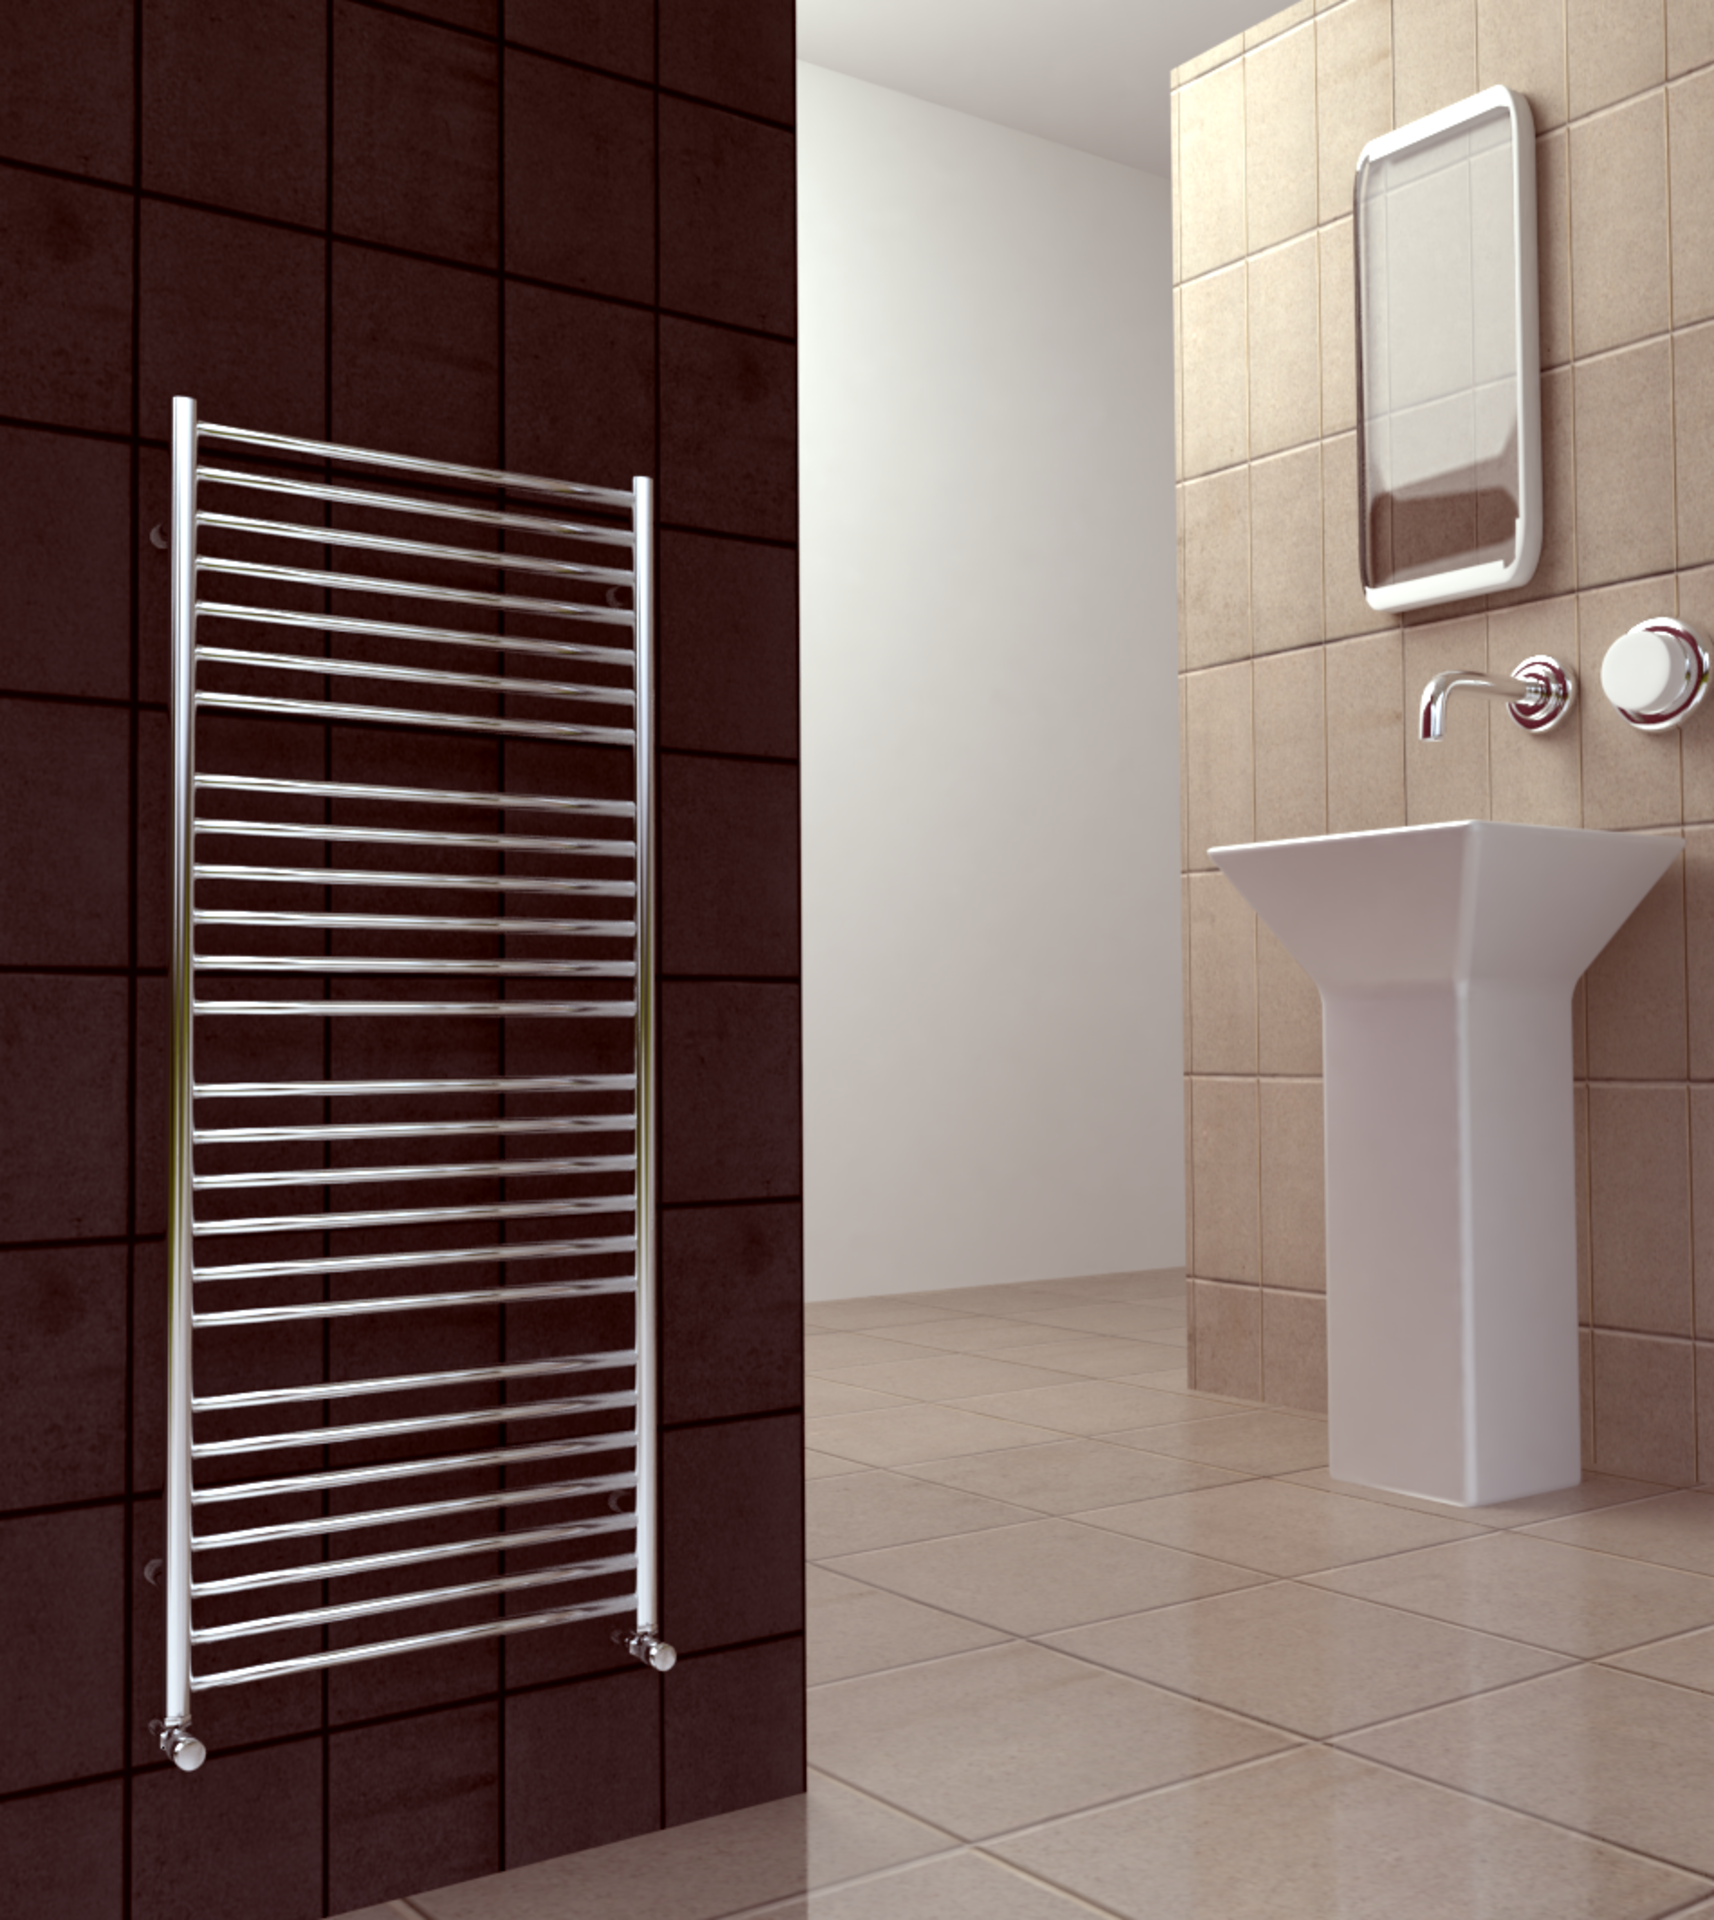 SS500 Maxi Plus 600 Radiator by SBH in Latte Finish. H1400 x W600mm. RRP £694.89